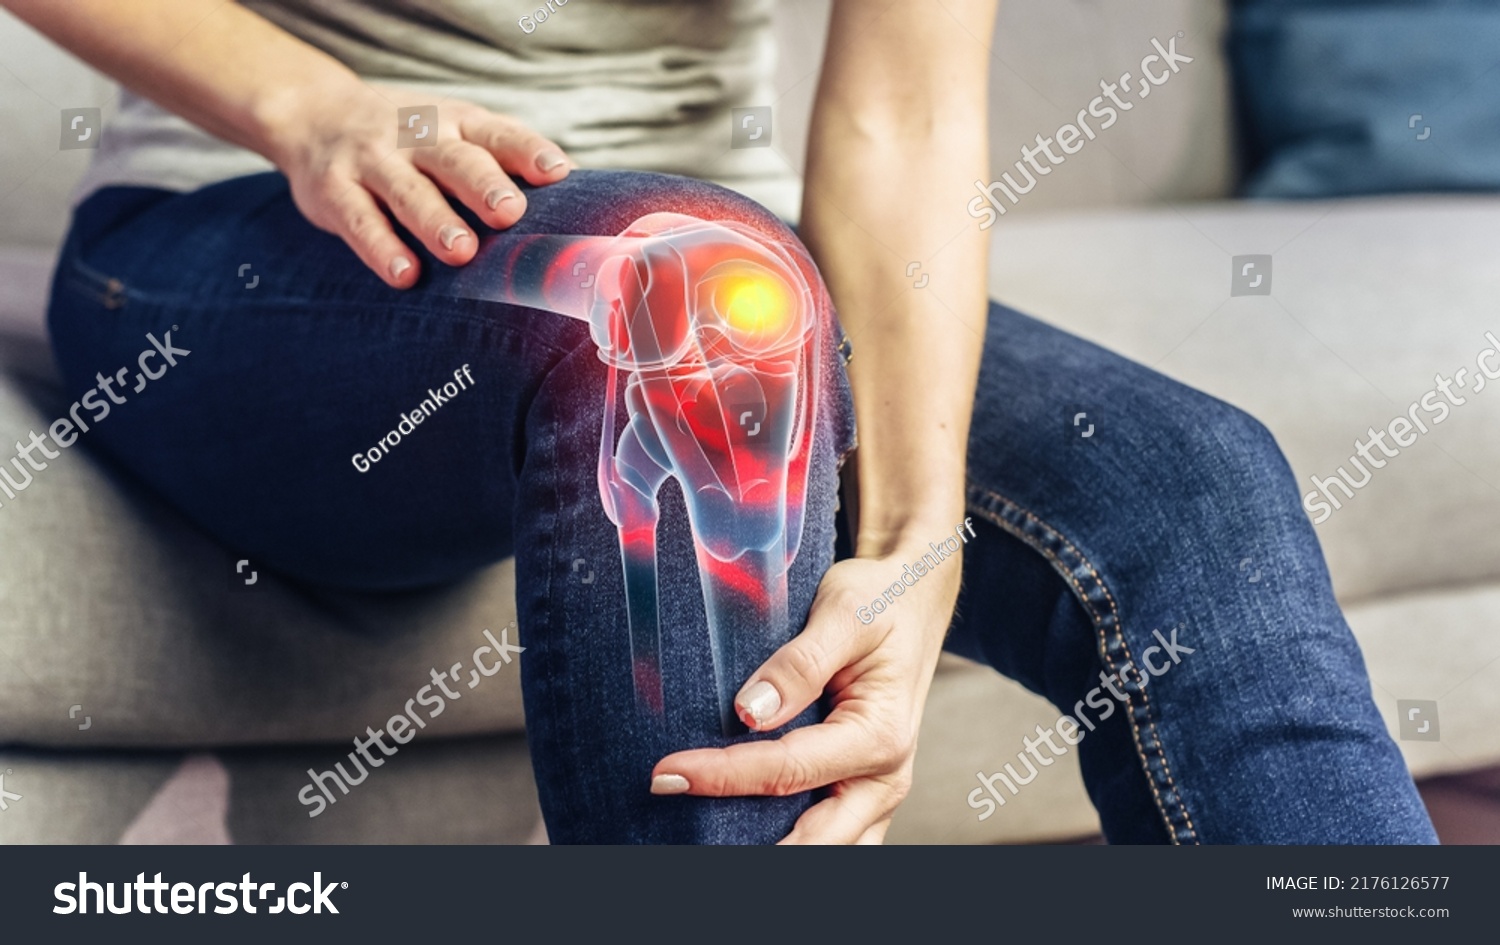 VFX Joint and Knee Pain Augmented Reality Render. Close Up of a Person Experiencing Discomfort in a Result of Leg Trauma or Arthritis. Massaging the Muscles to Ease the Injury. #2176126577